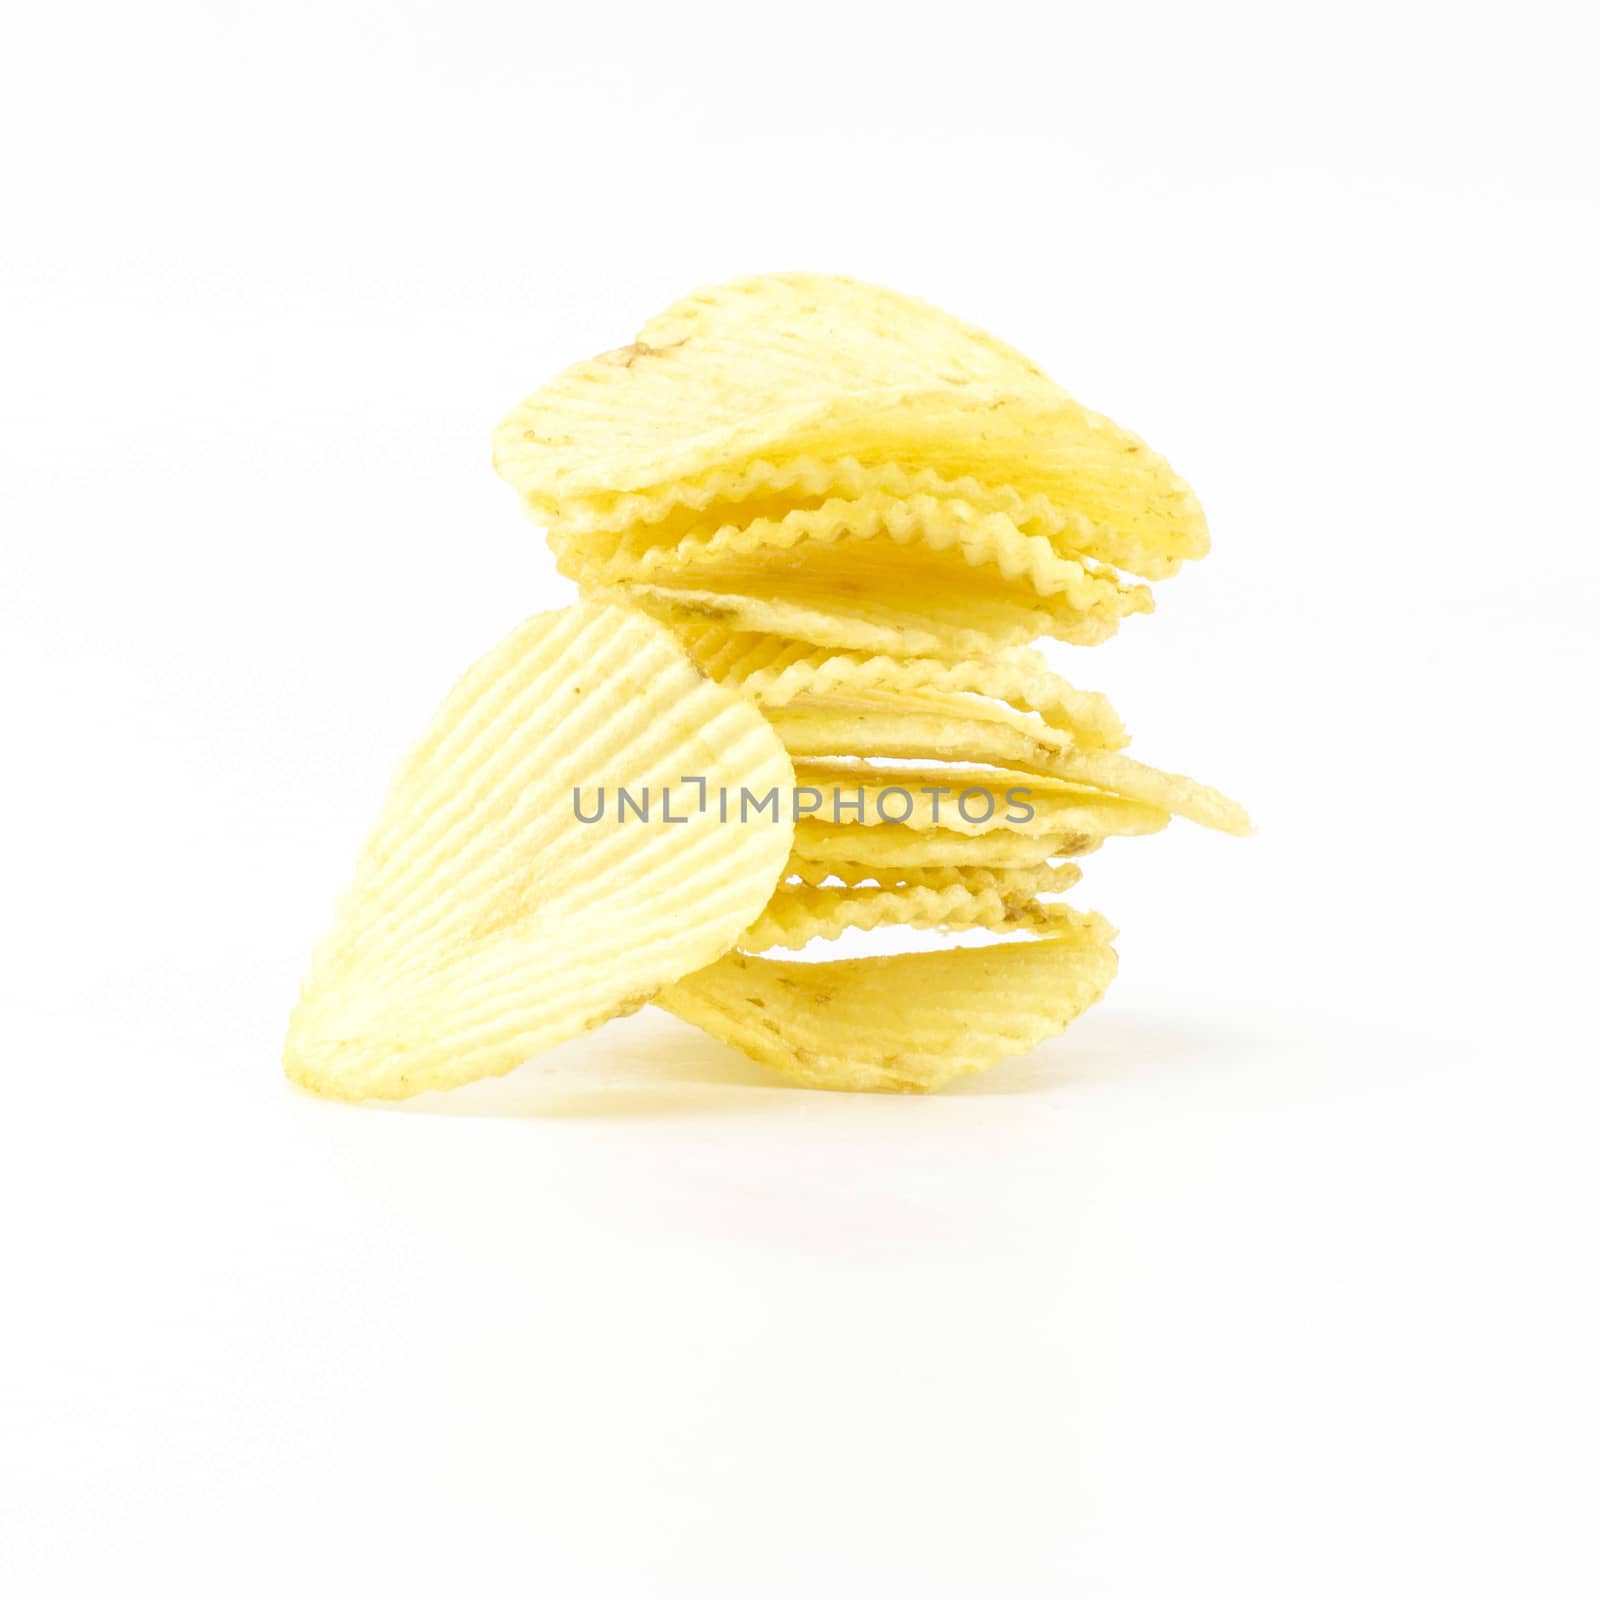 snack potato chips isolated on white background